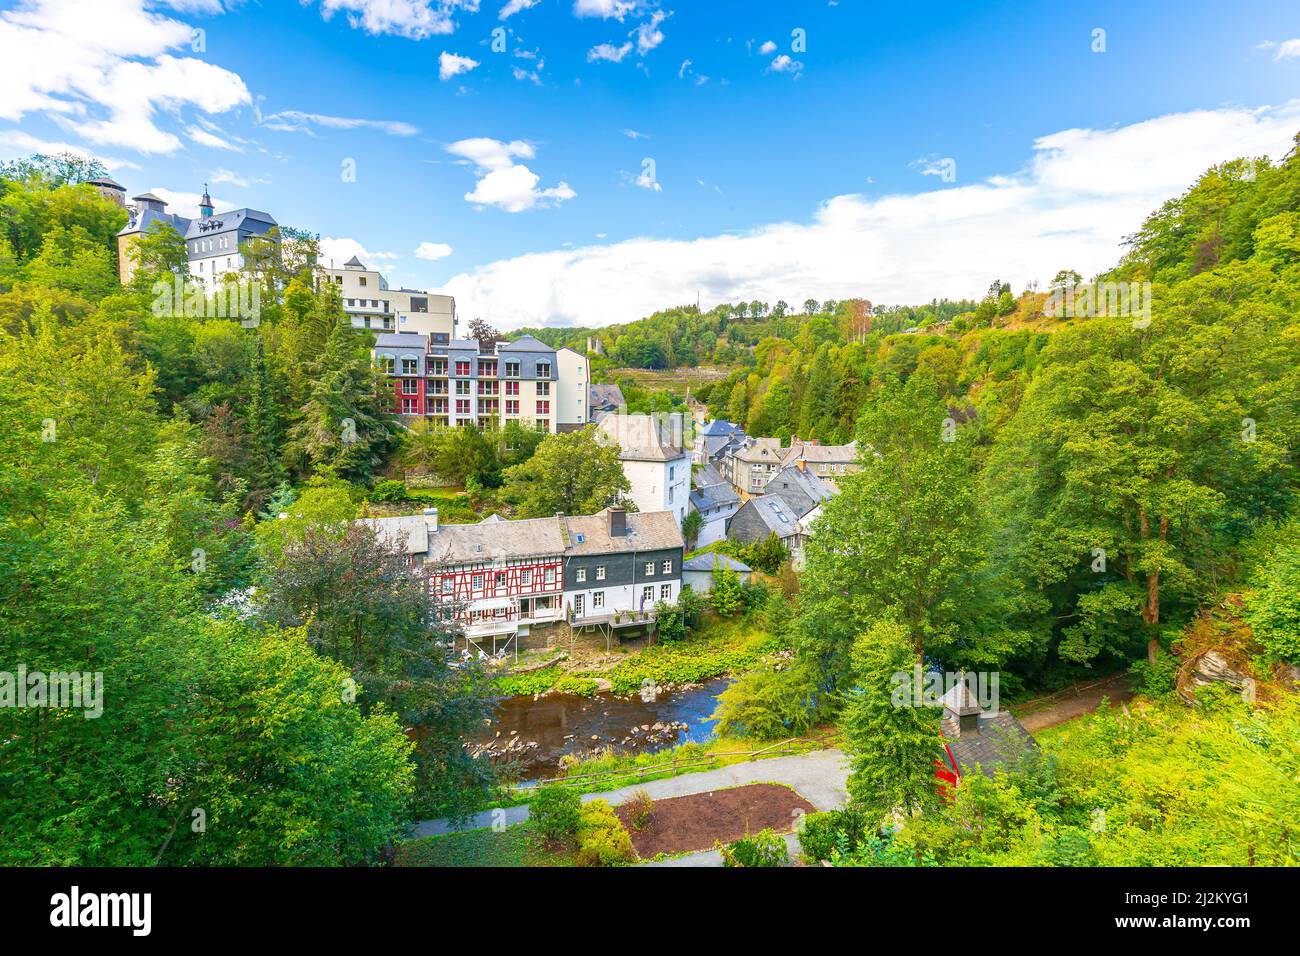 Best of the touristic village Monschau, located in the hills of the North Eifel, within the Hohes Venn – Eifel Nature Park in the narrow valley of the Stock Photo